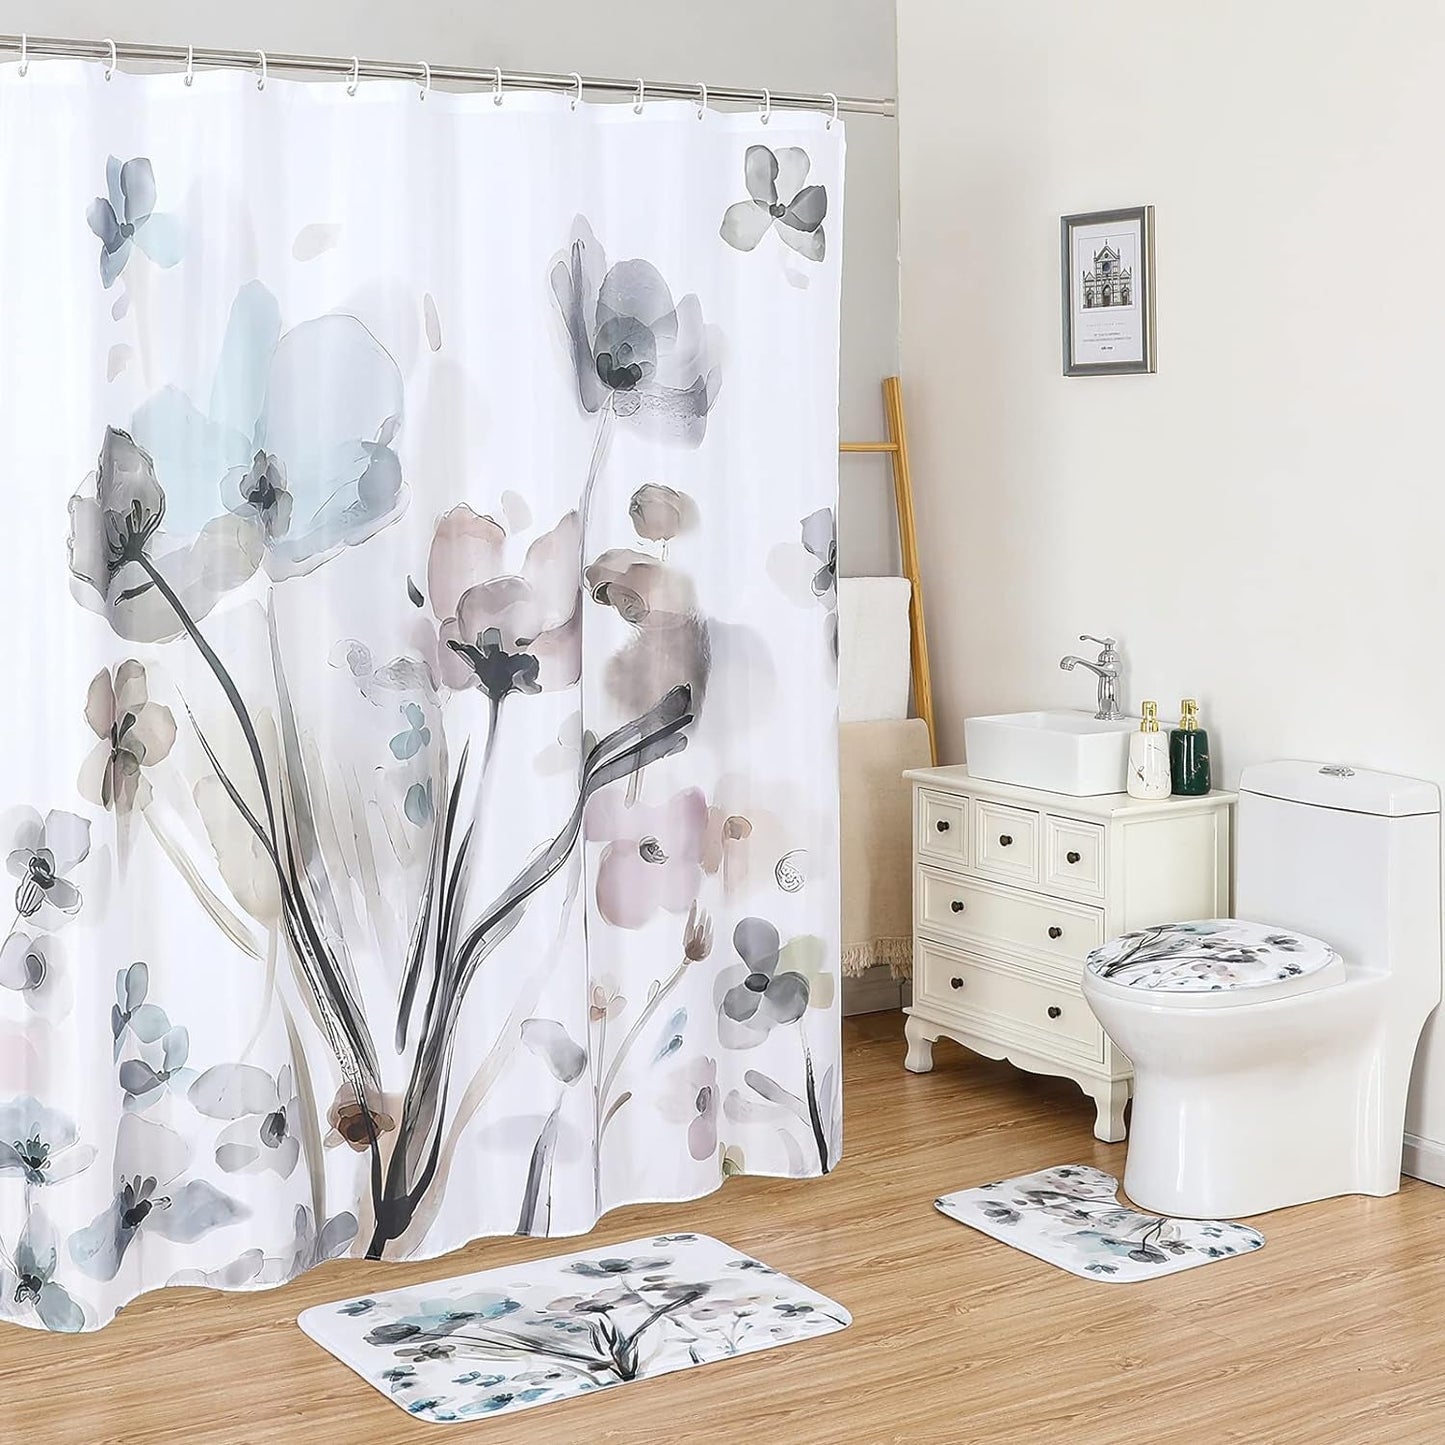 Floral Shower Curtain with 12 Hooks, 72''X72'' Waterproof Polyester Fabric Plant Shower Curtain for Bathroom, Heavy Weighted Hem Bathroom Curtain, Machine Washable, Quick Dry